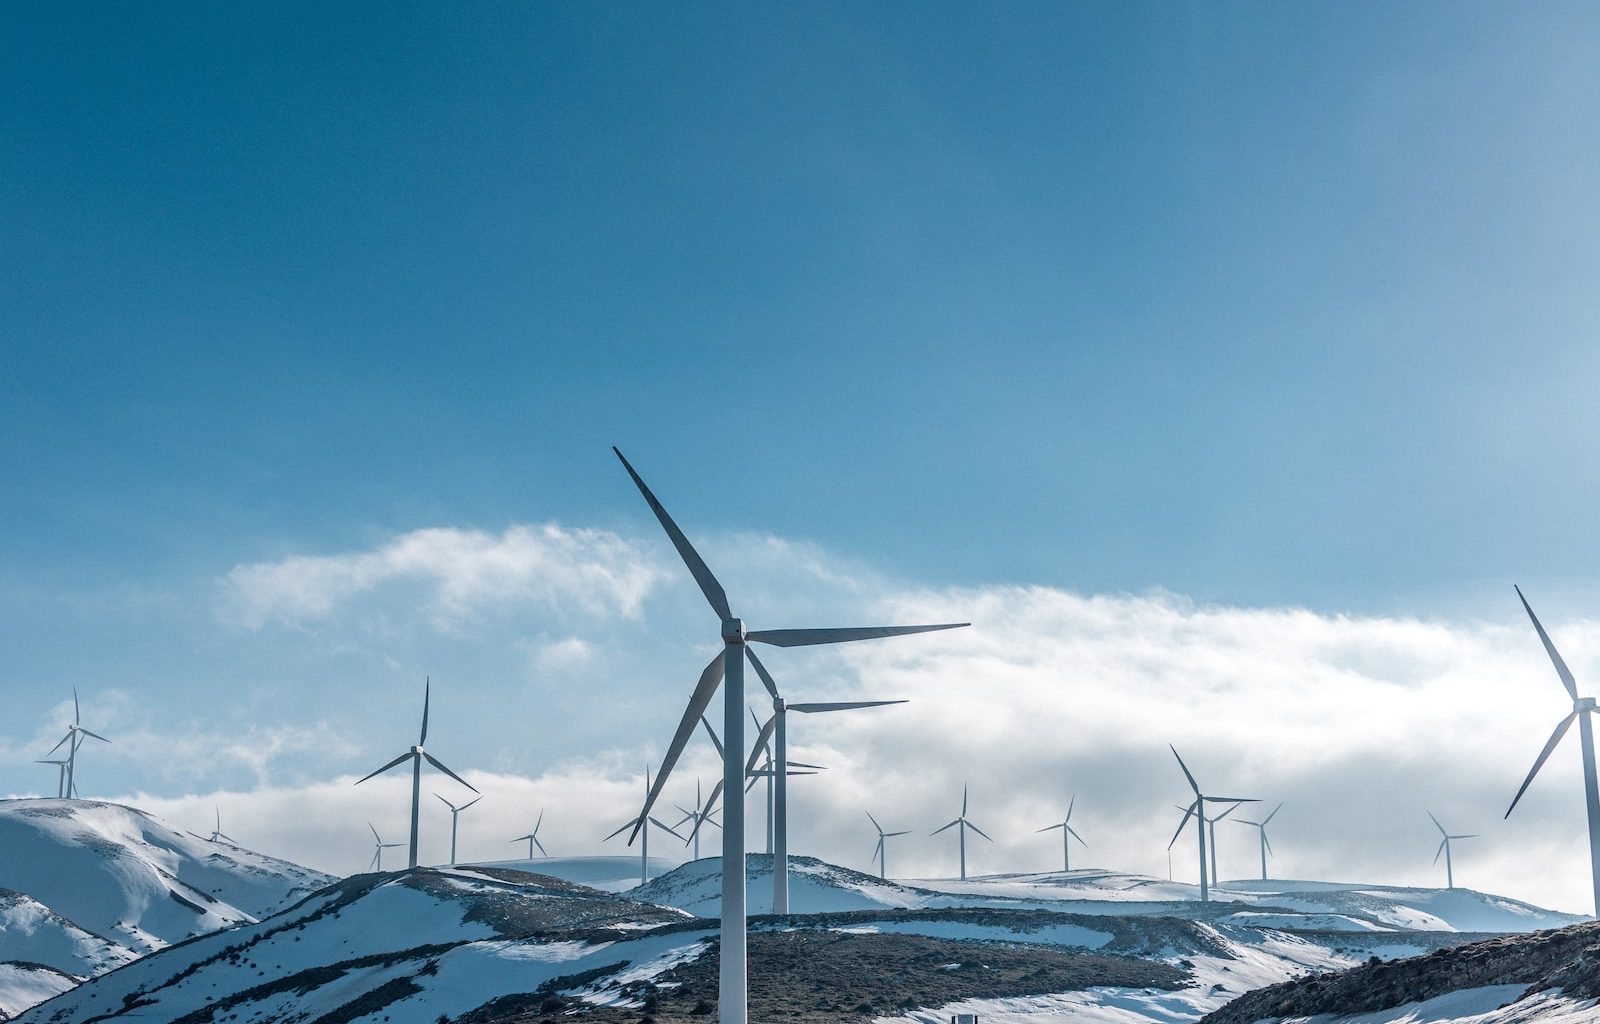 wind turbines on snowy mountain under clear blue sky during daytime